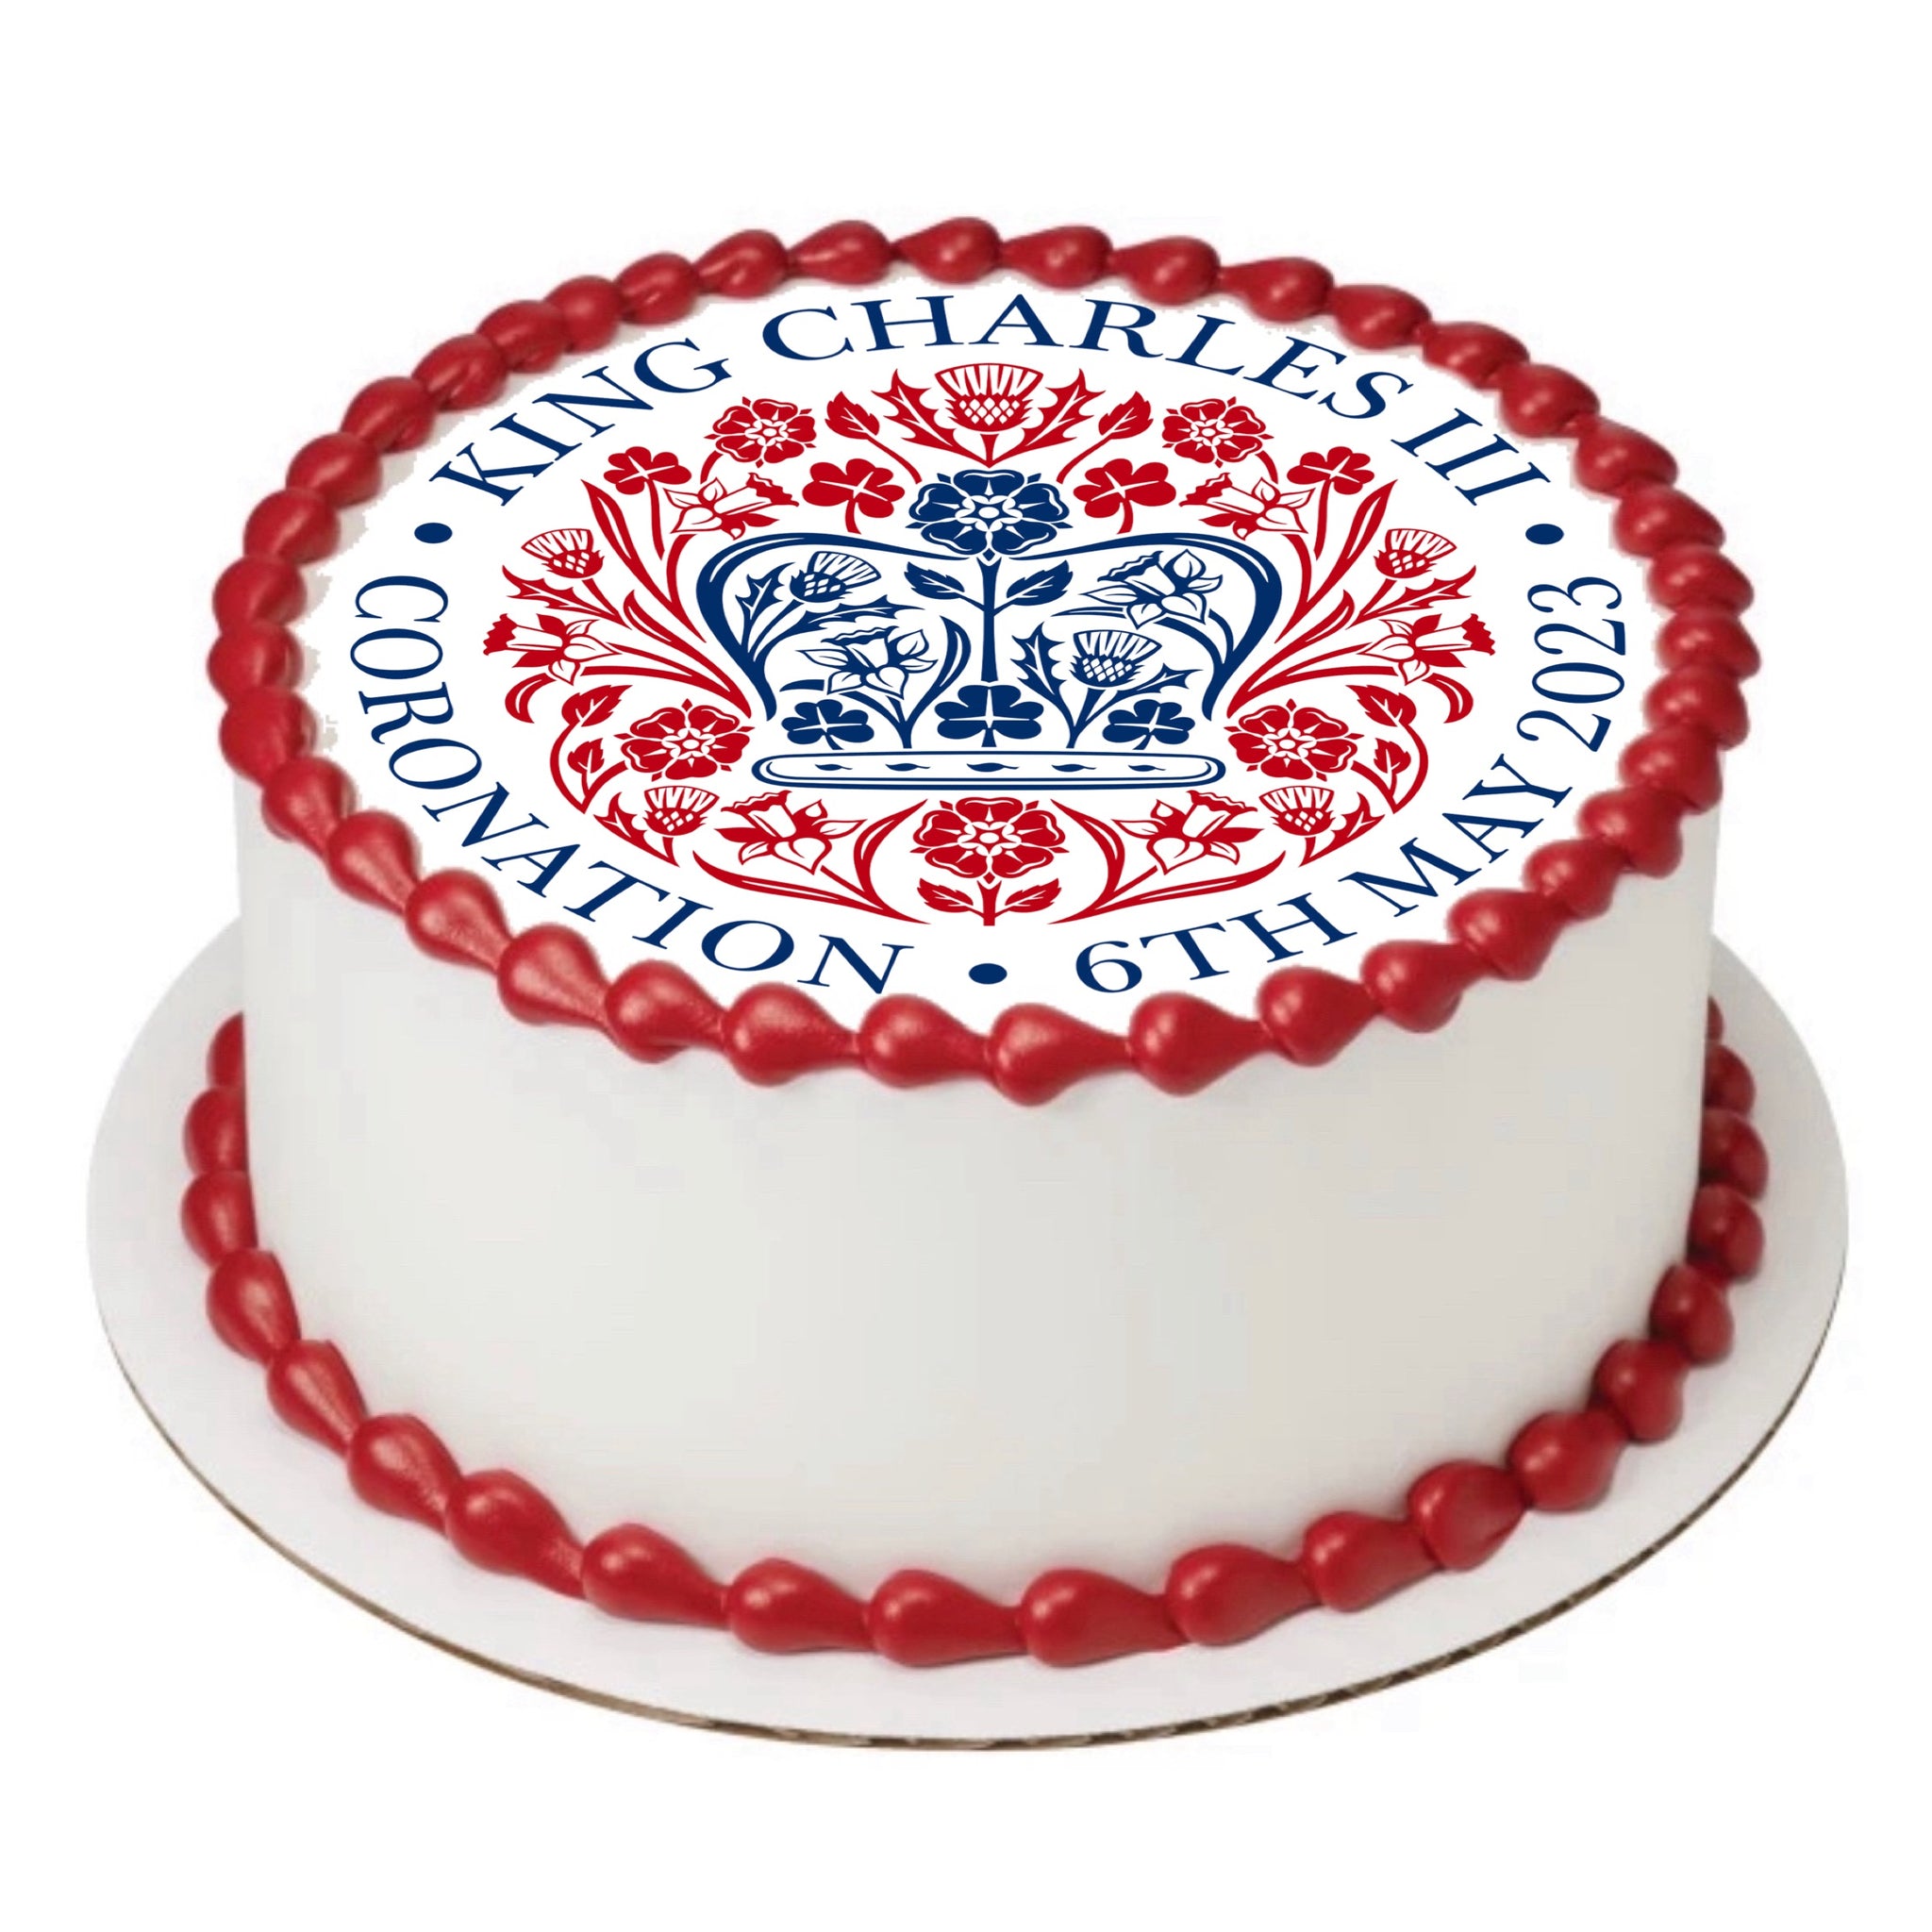 King Charles Coronation 8 INCH Pre-Cut EDIBLE Icing Cake Topper Celebration Cake Decorations